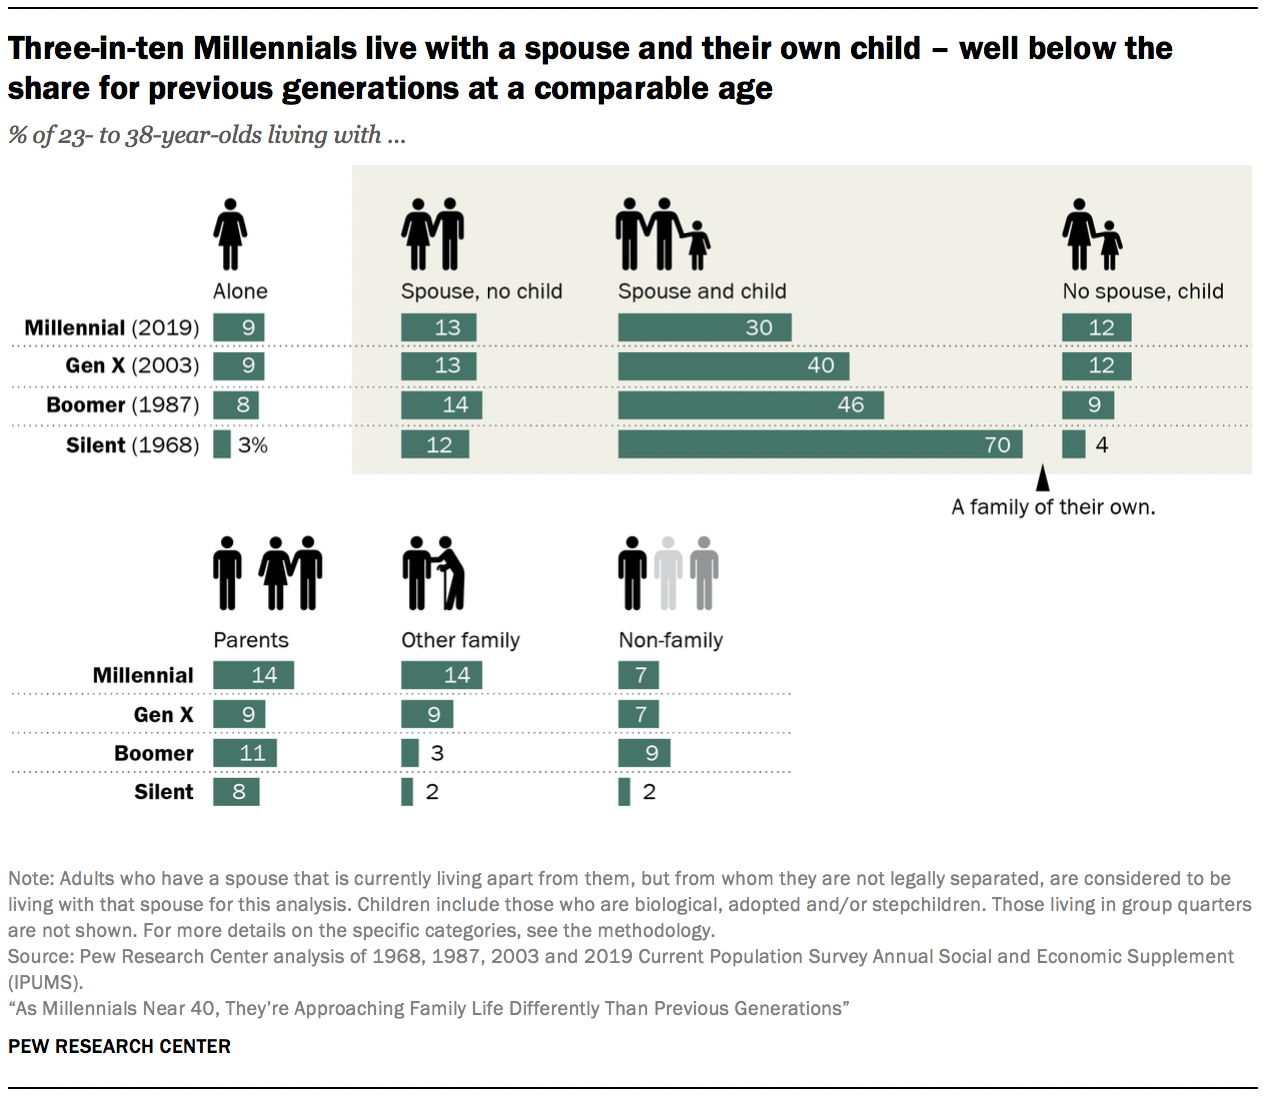 Three-in-ten Millennials live with a spouse and their own child – well below the share for previous generations at a comparable age